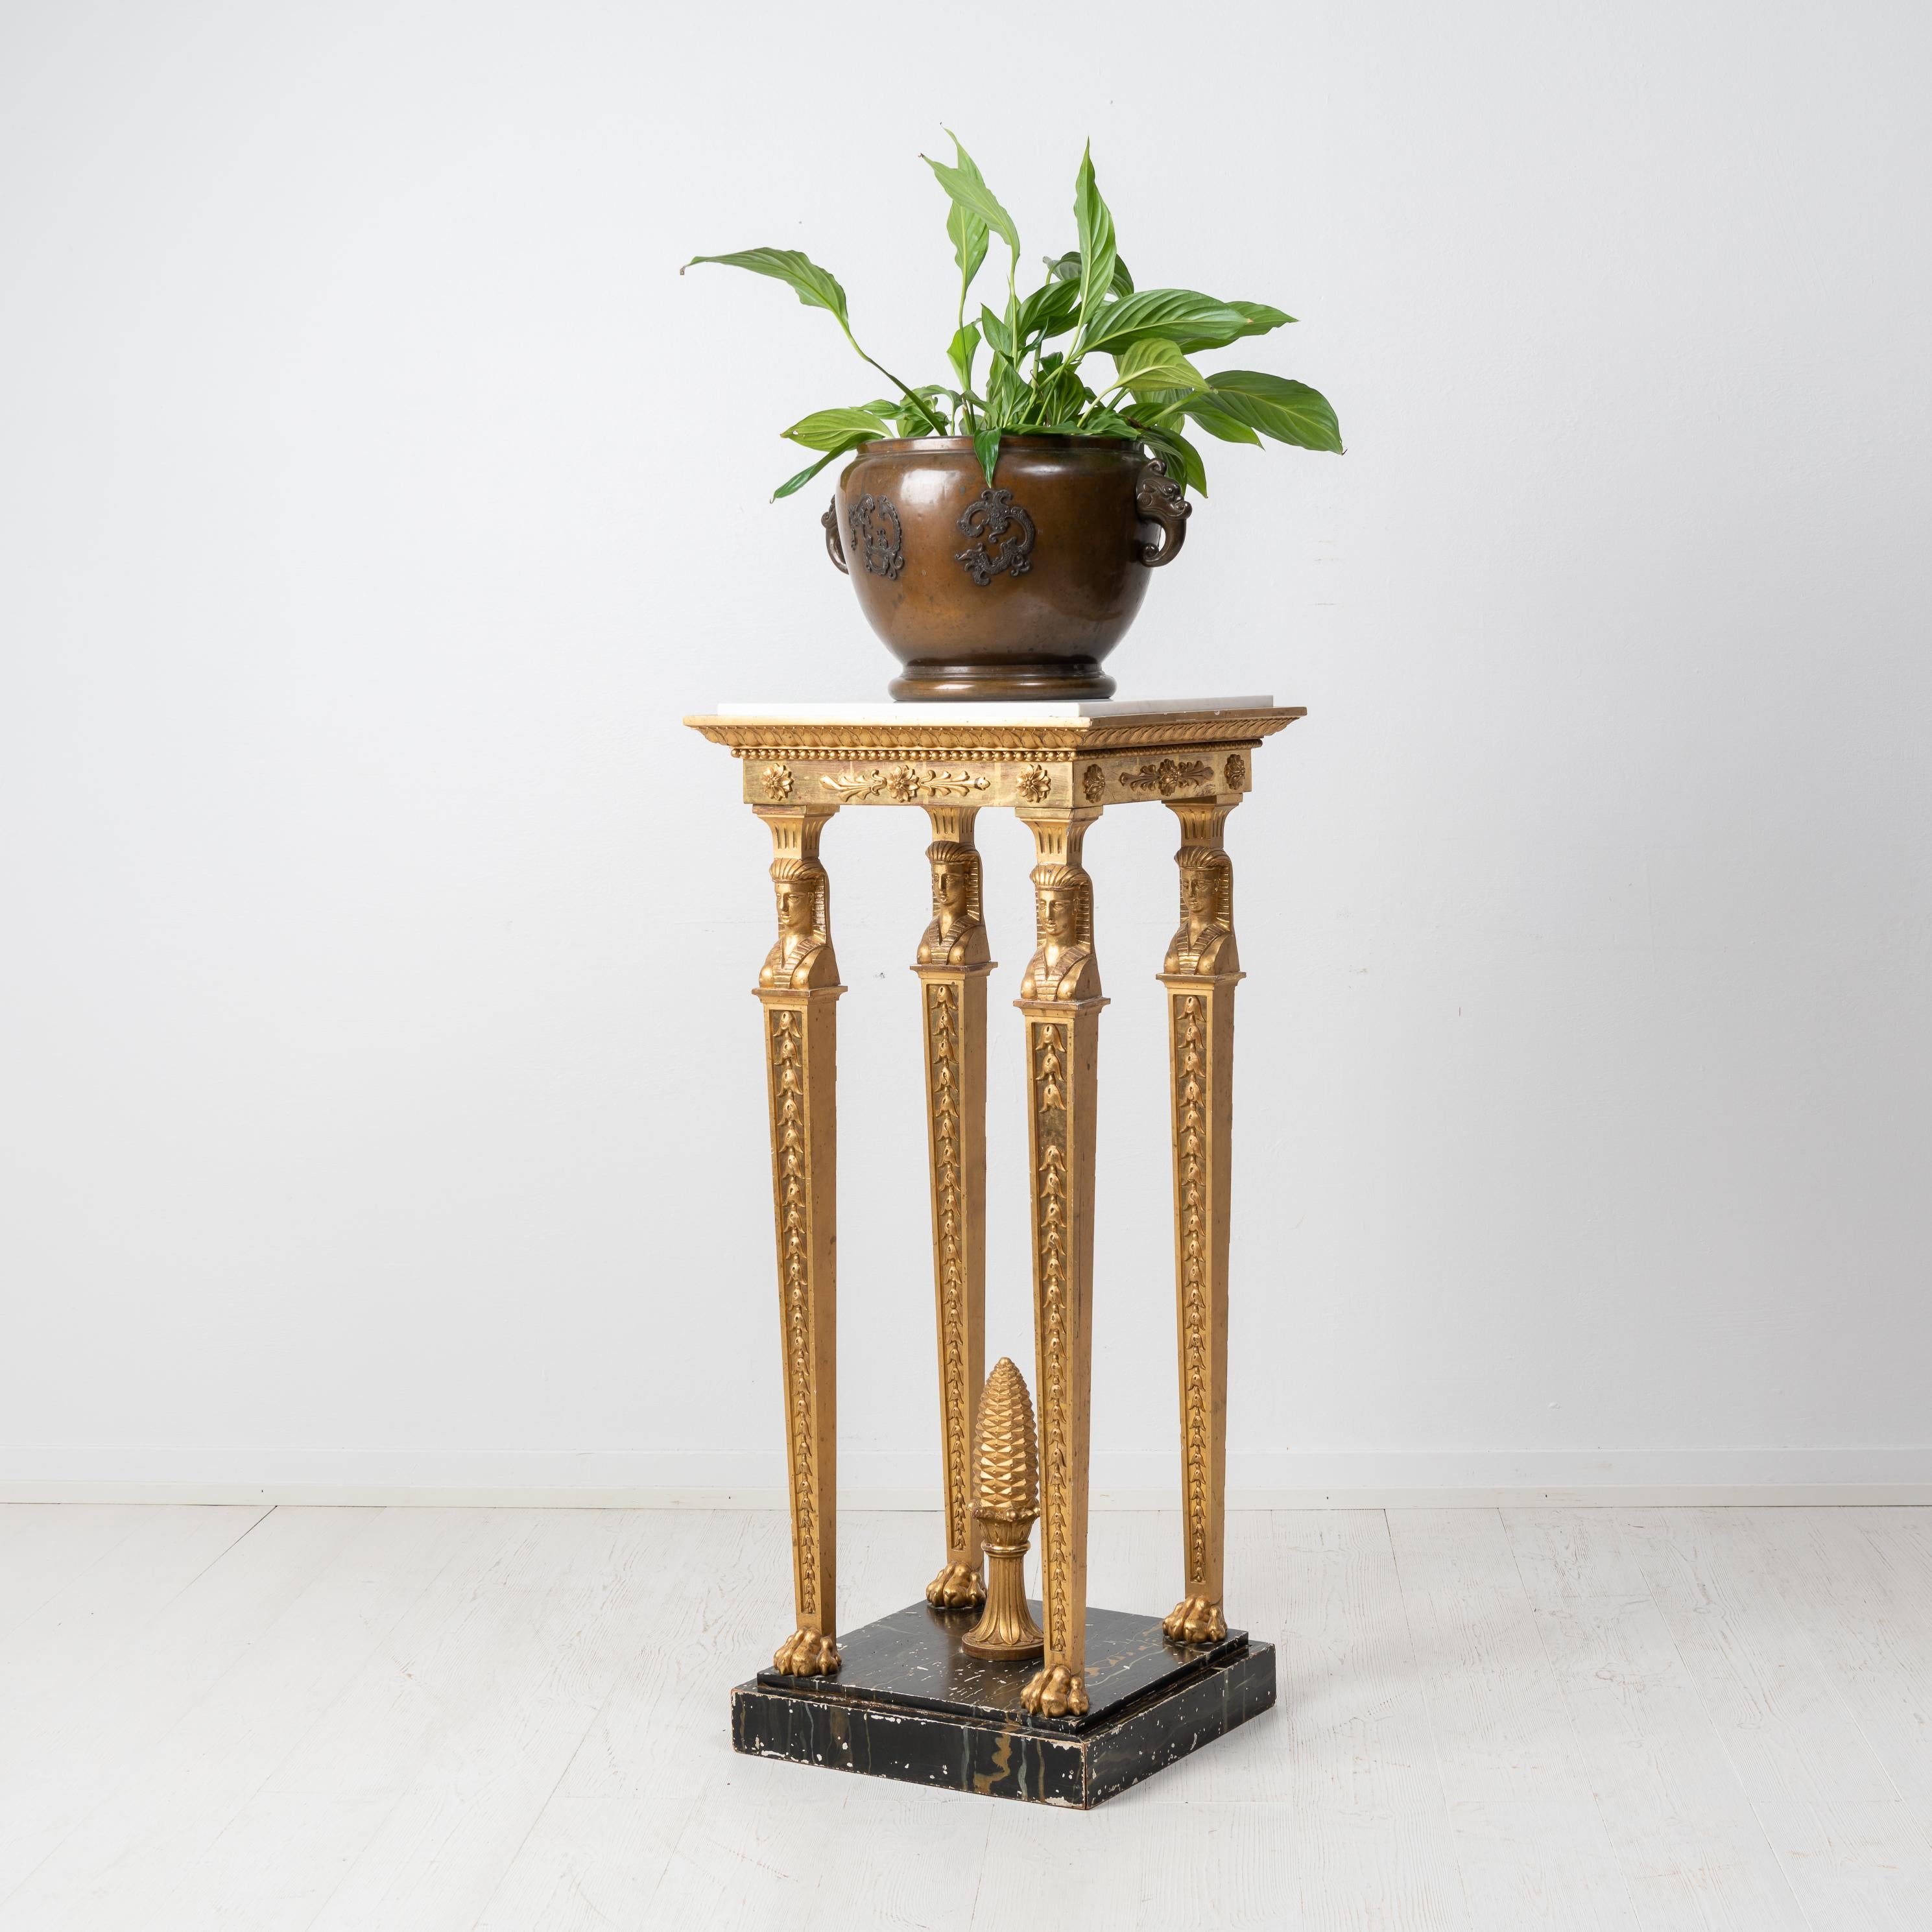 Gilded empire pedestal or geridong from the mid 1800s, around 1840. The pedestal is from Sweden and is gilded with a white marble top in Carrara marble. The pedestal is in good vintage condition consistent with age with some smaller traces of use.